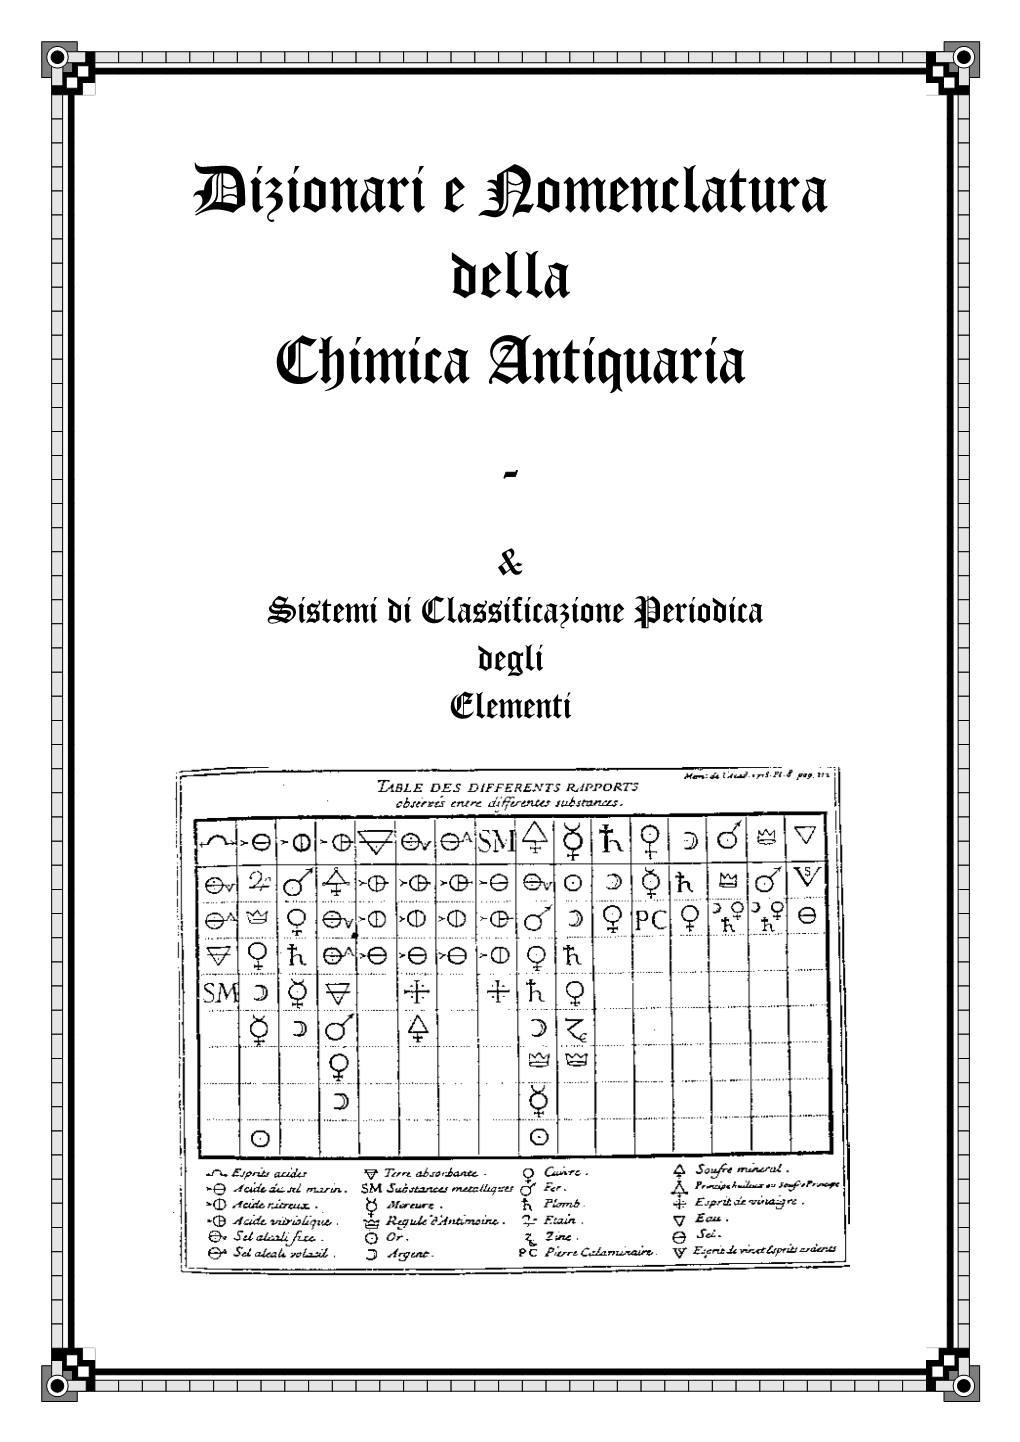 A Dictionary of the New Chymical Nomenclature from Method of Chymical Nomenclature (Paris, 1787); Translated by James St